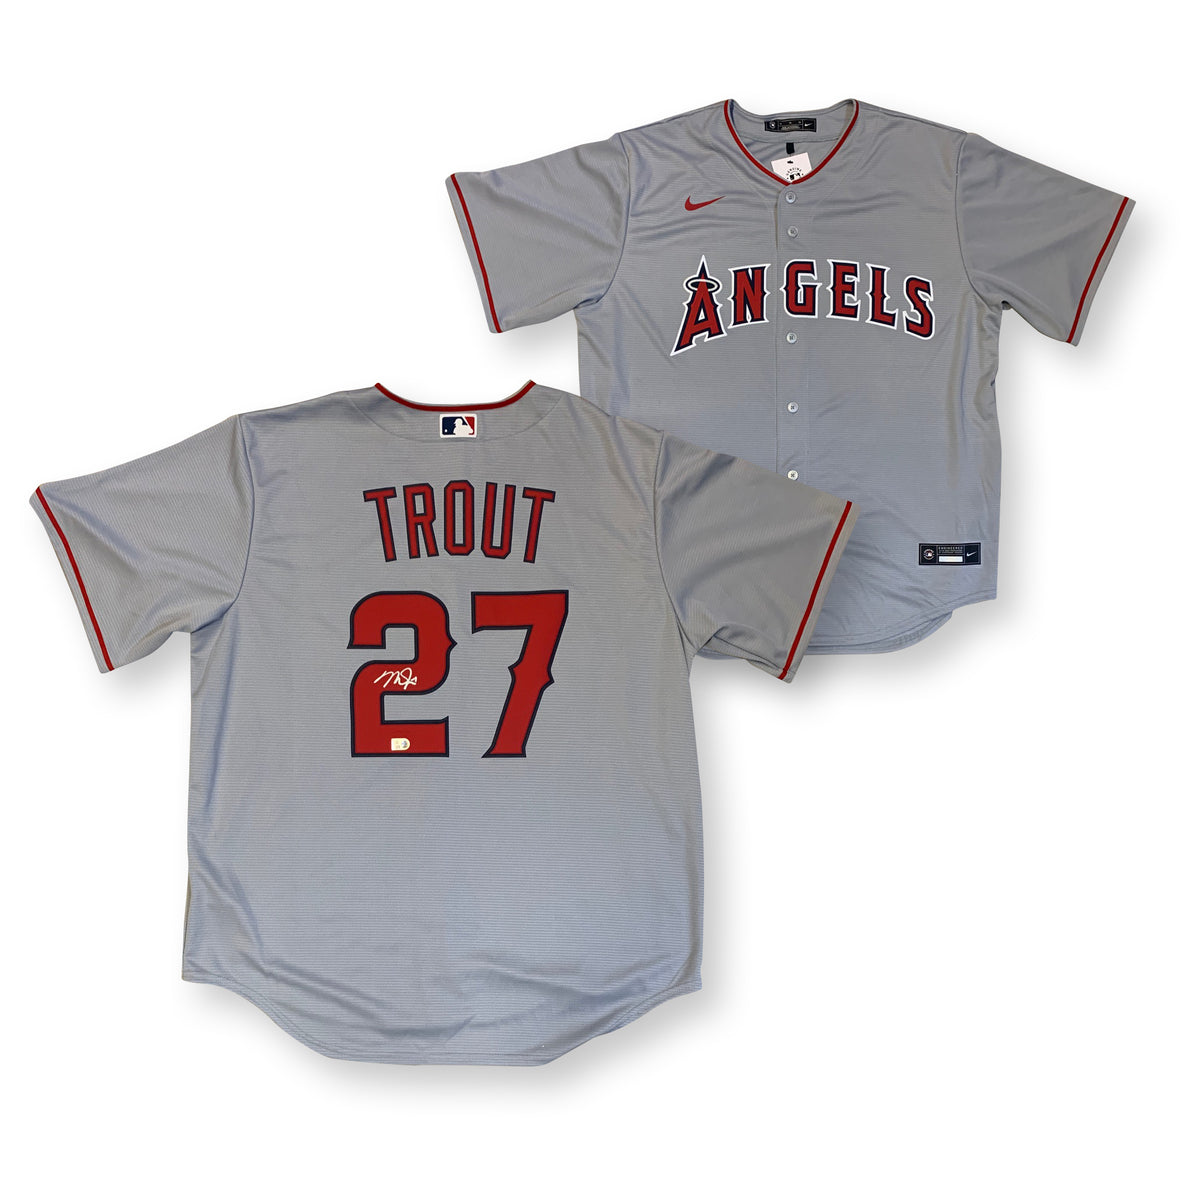 Mike Trout Signed Majestic Angeles Jersey JSA AUTHENTIC LOA